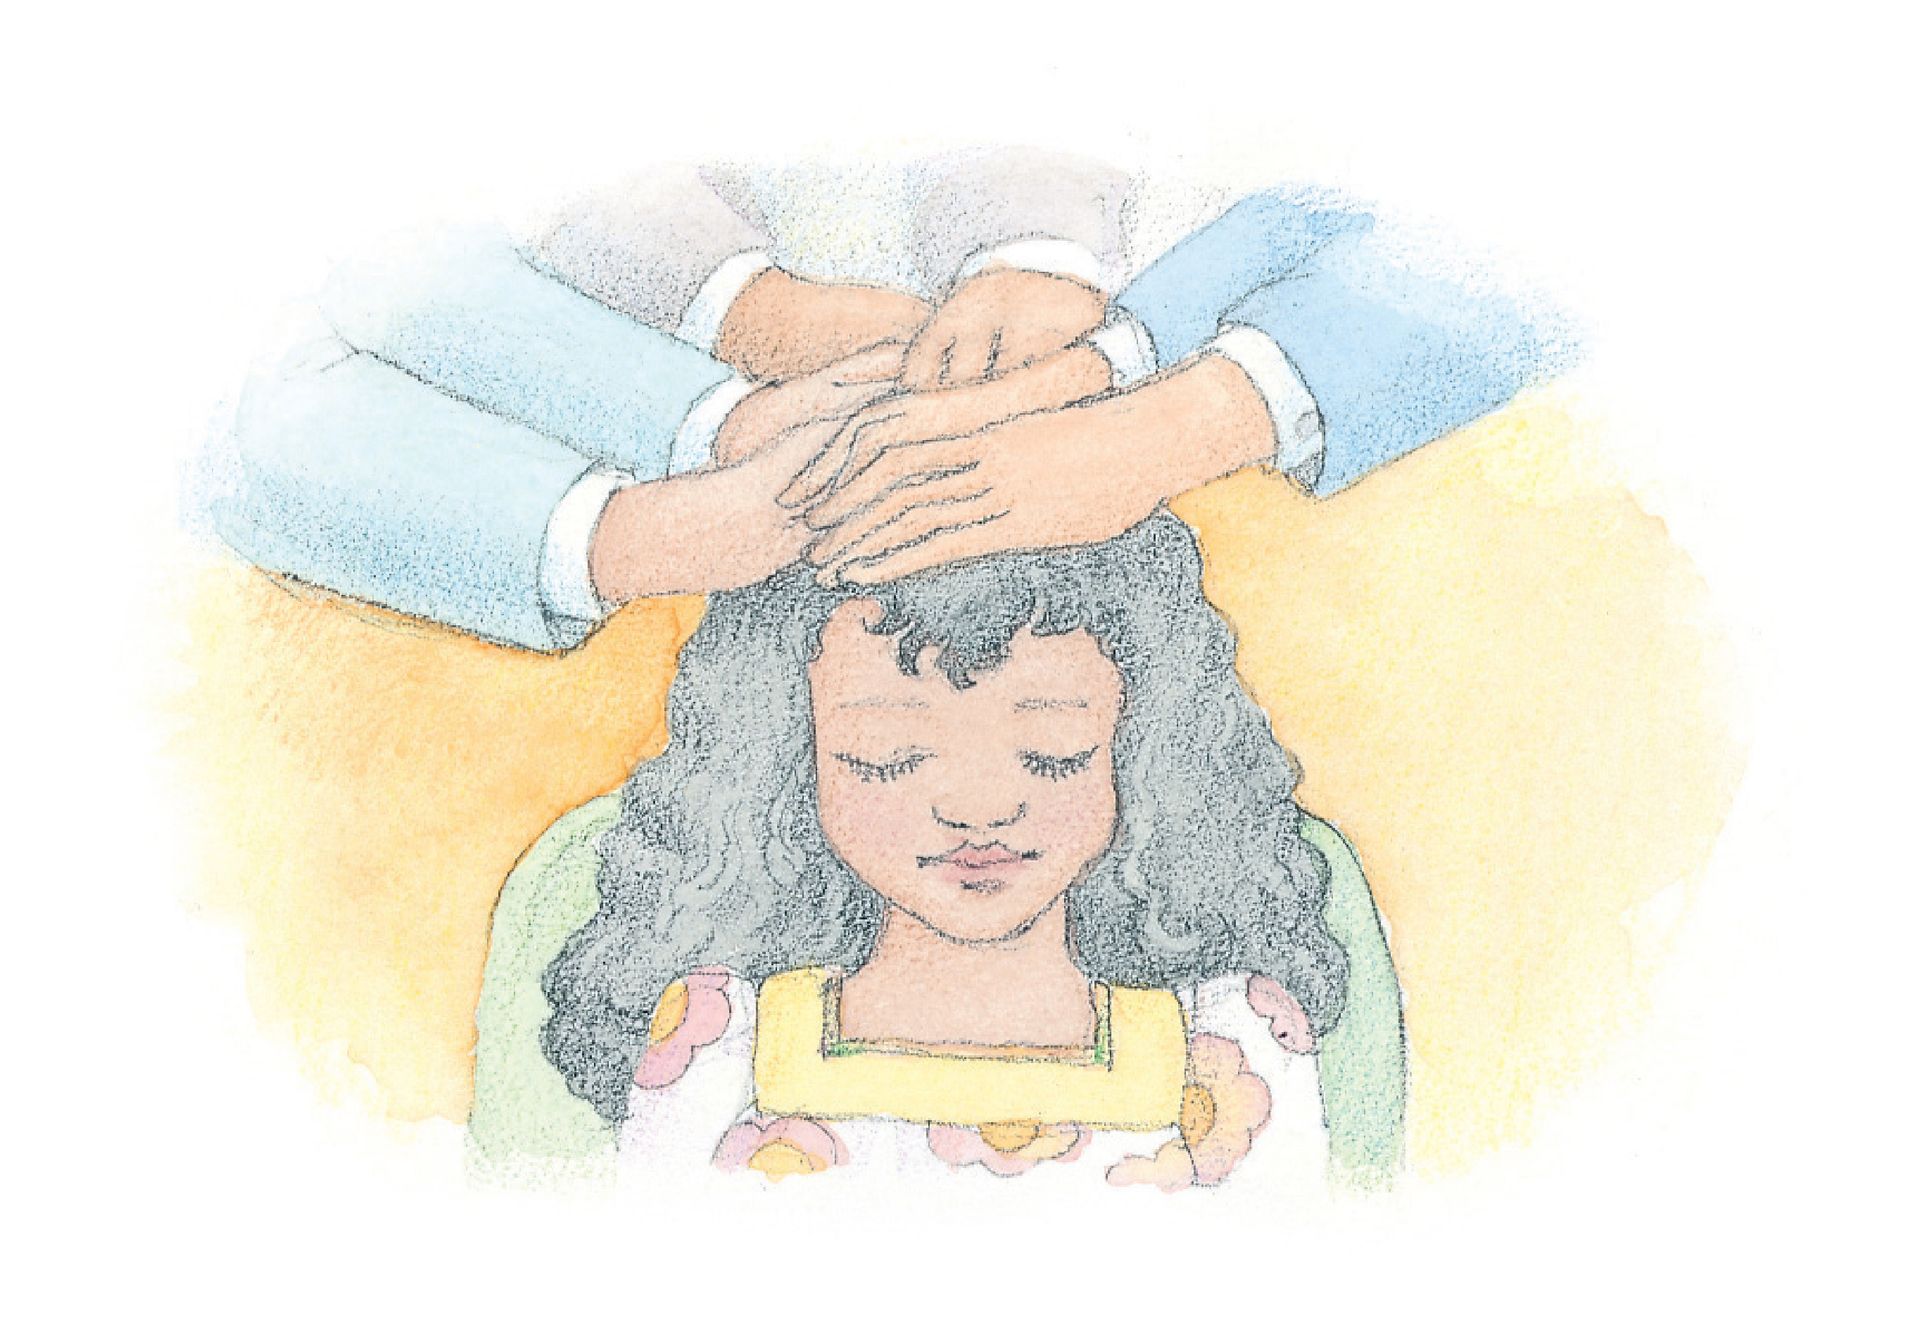 A young girl being confirmed a member of the Church. From the Children’s Songbook, page 77, “The Church of Jesus Christ”; watercolor illustration by Phyllis Luch.